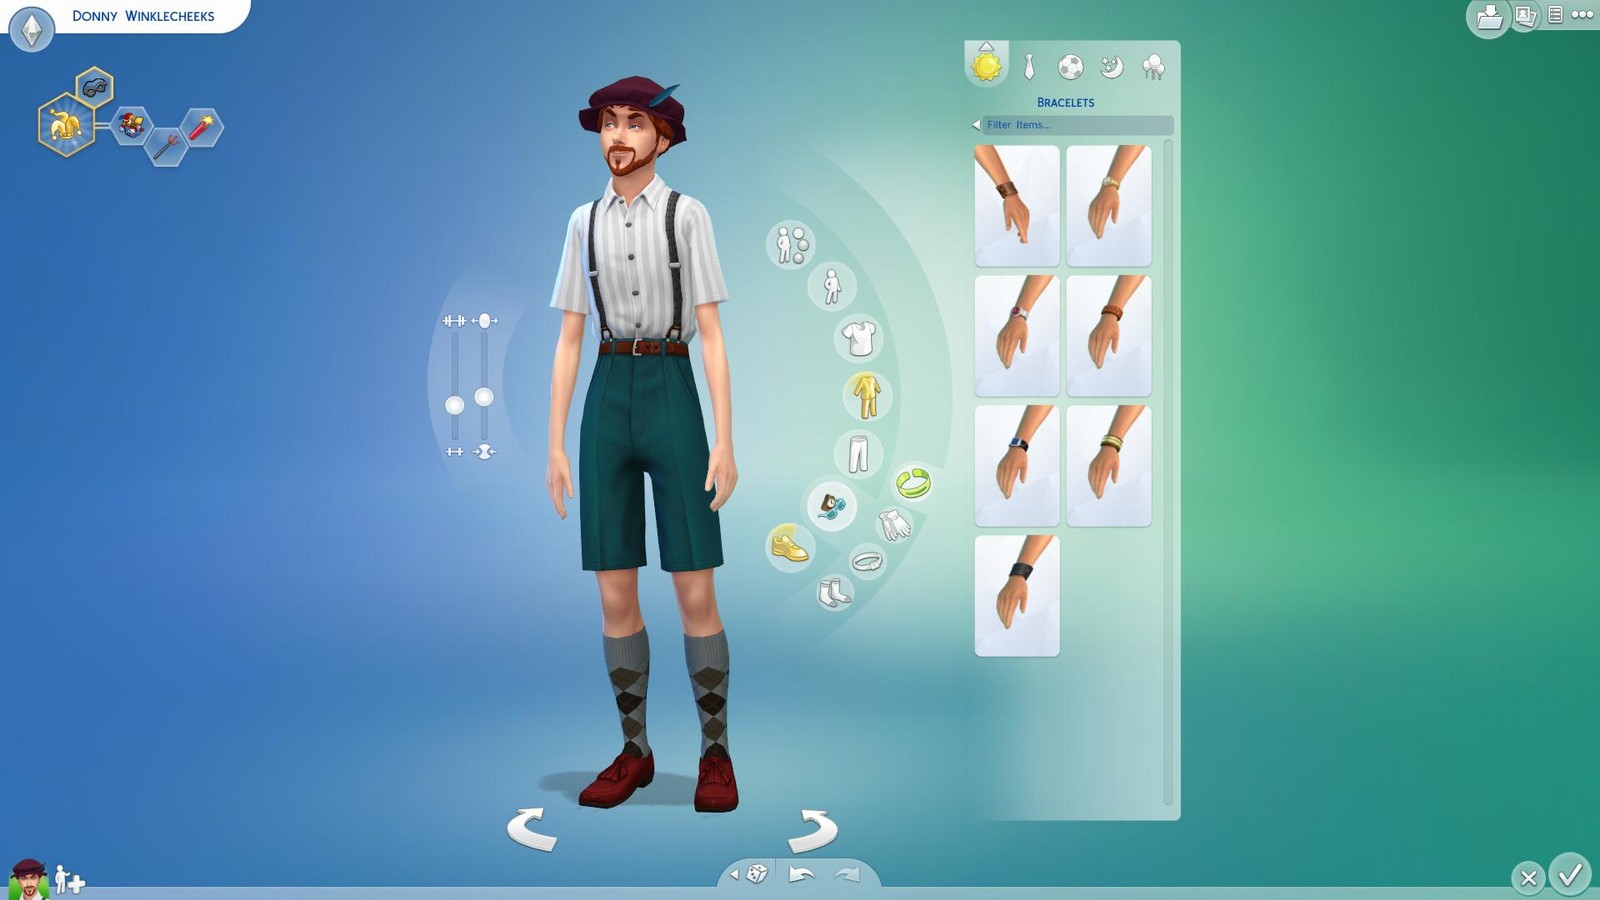 The Sims 4 Limited Edition vs Deluxe Edition compared